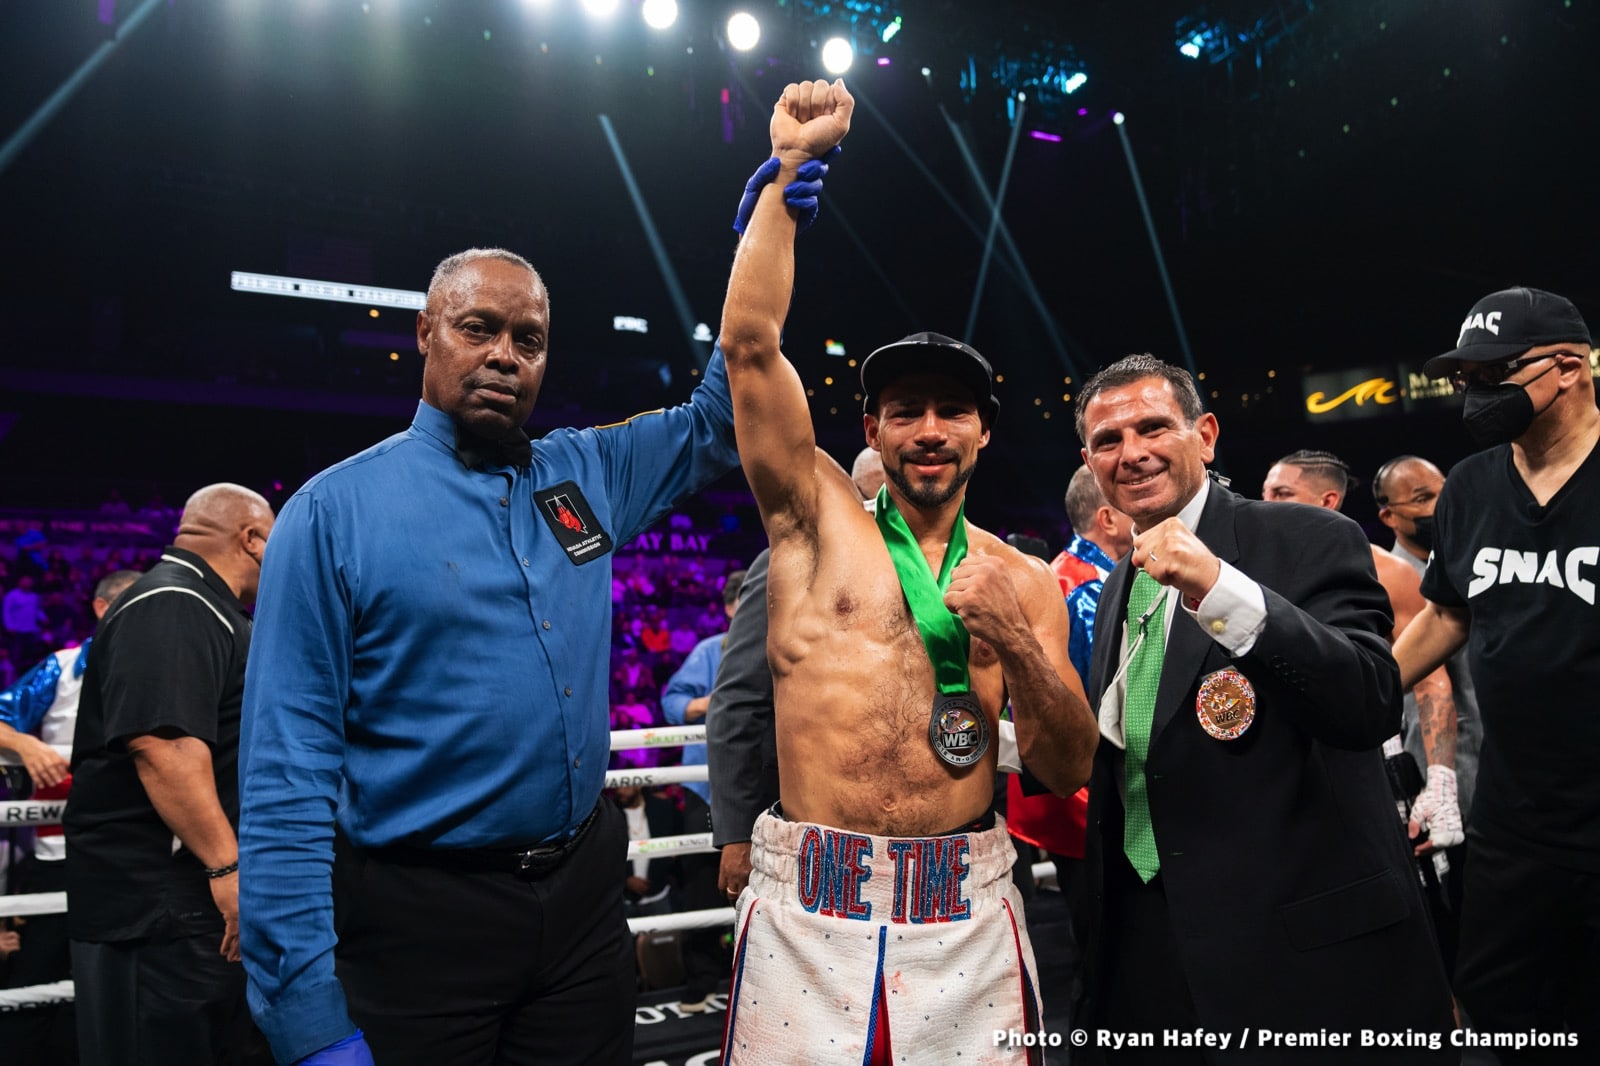 Image: Thurman hints he WON'T fight Terence Crawford